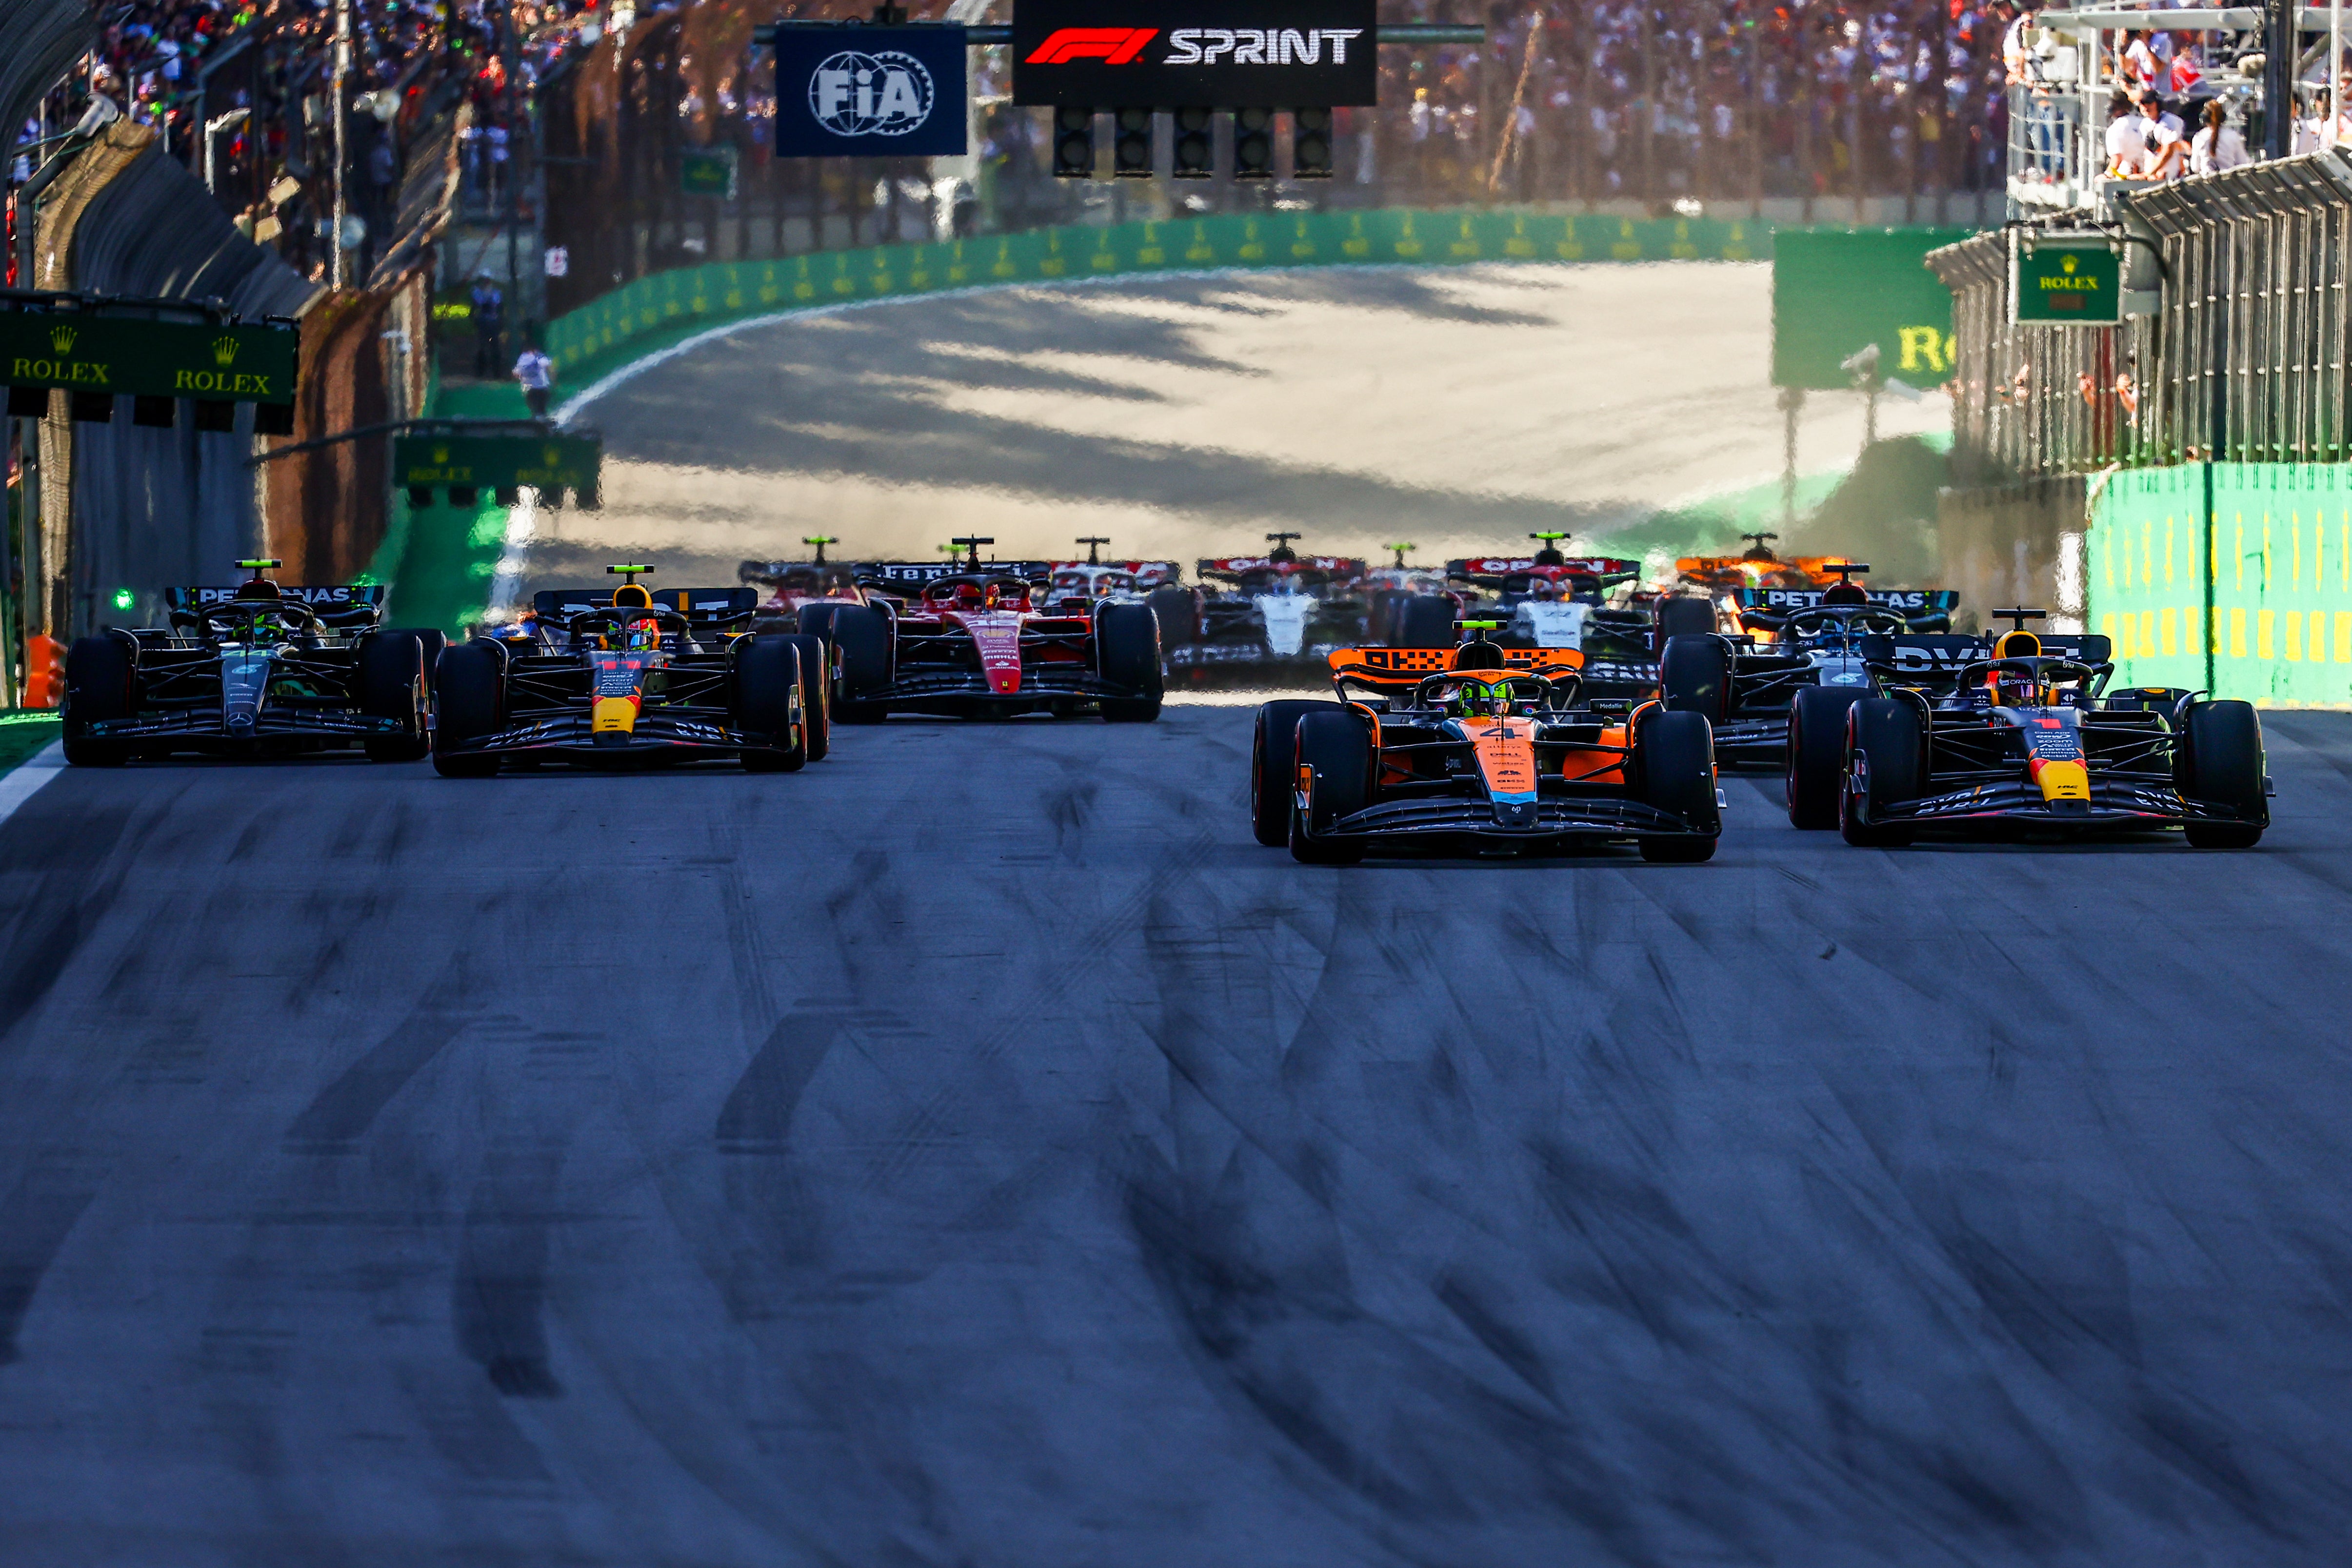 Max Verstappen thwarted Lando Norris’ bid for a first F1 win in the sprint race in Brazil